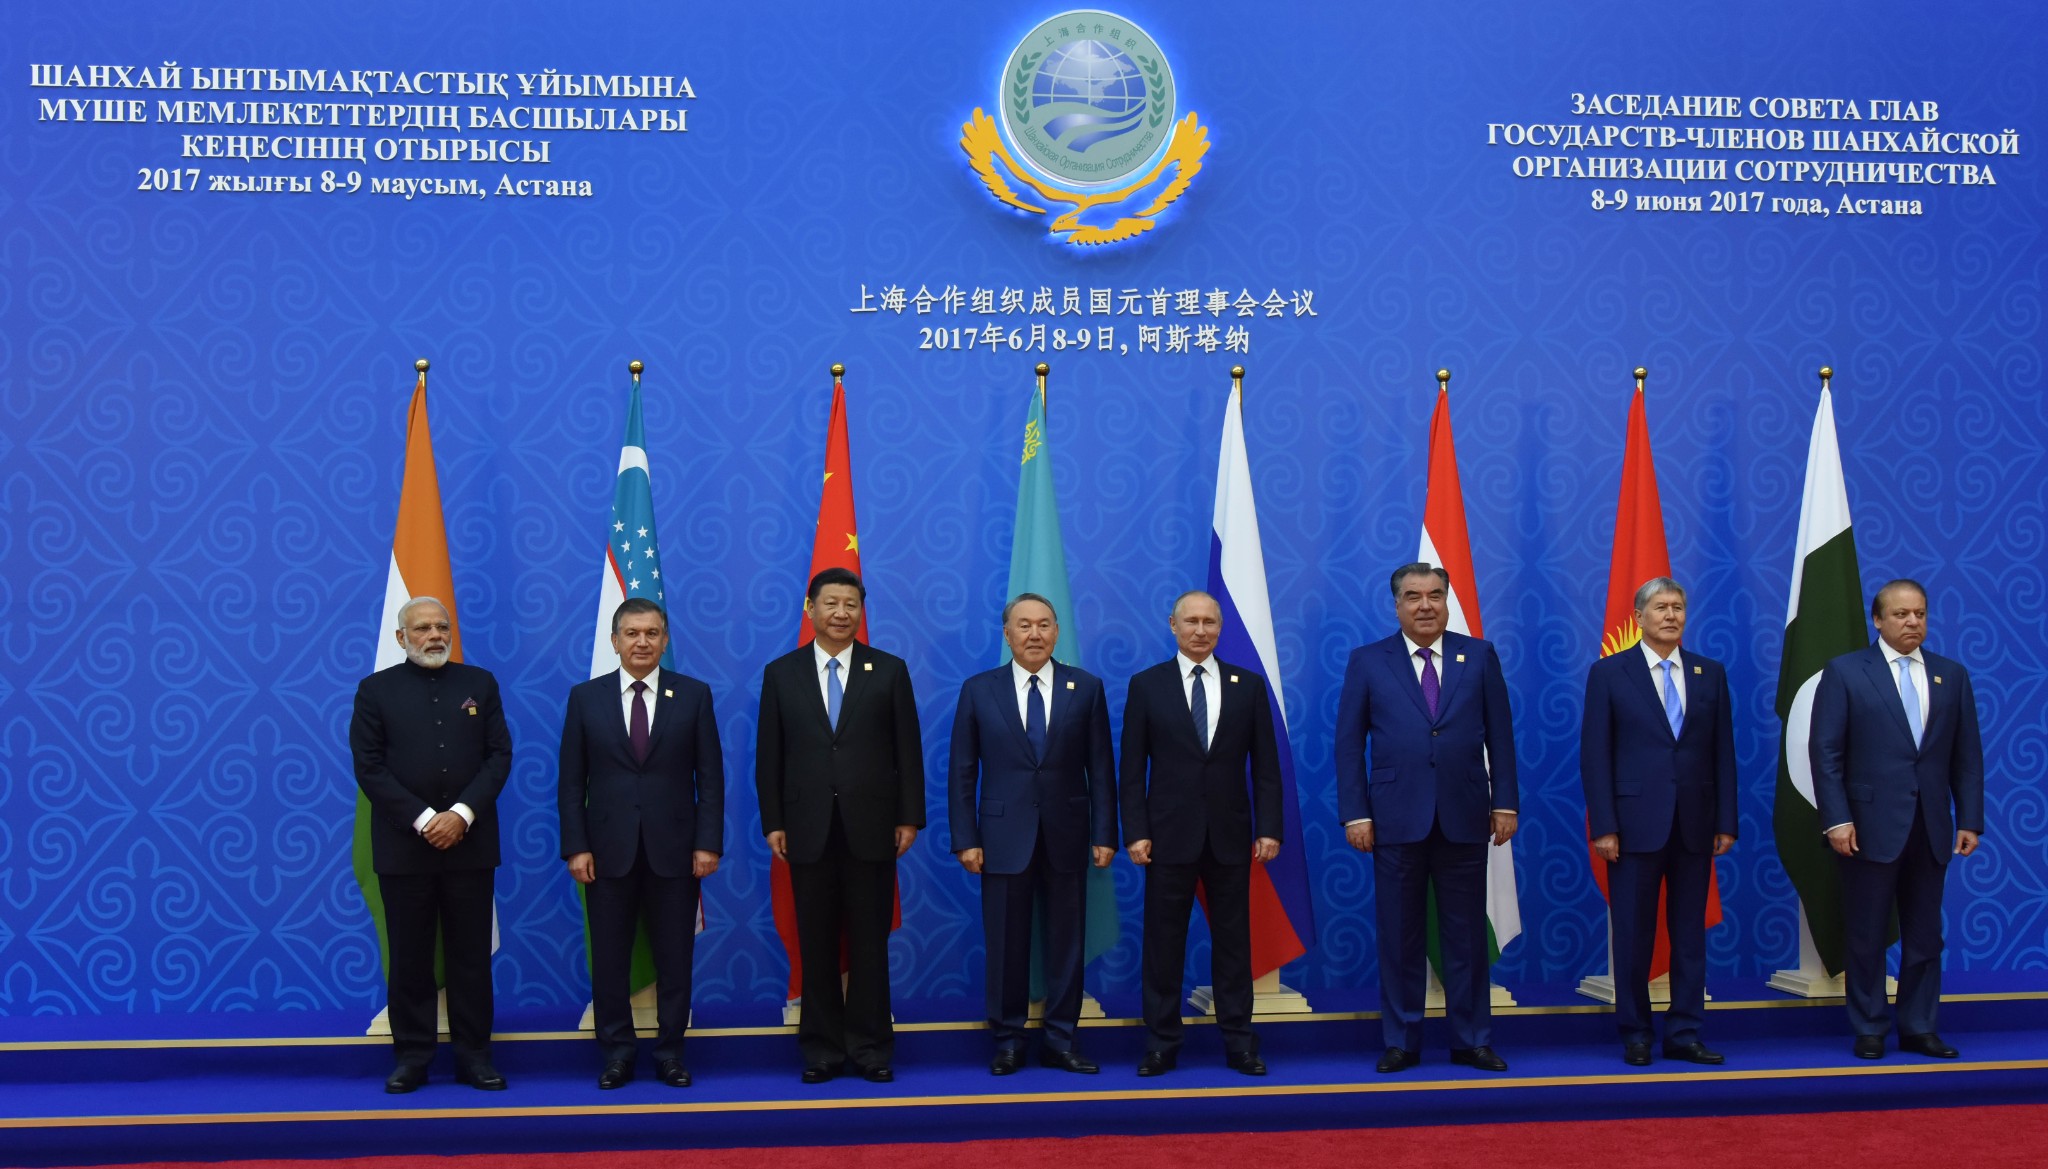 The Possible Impacts of Iran’s SCO Membership